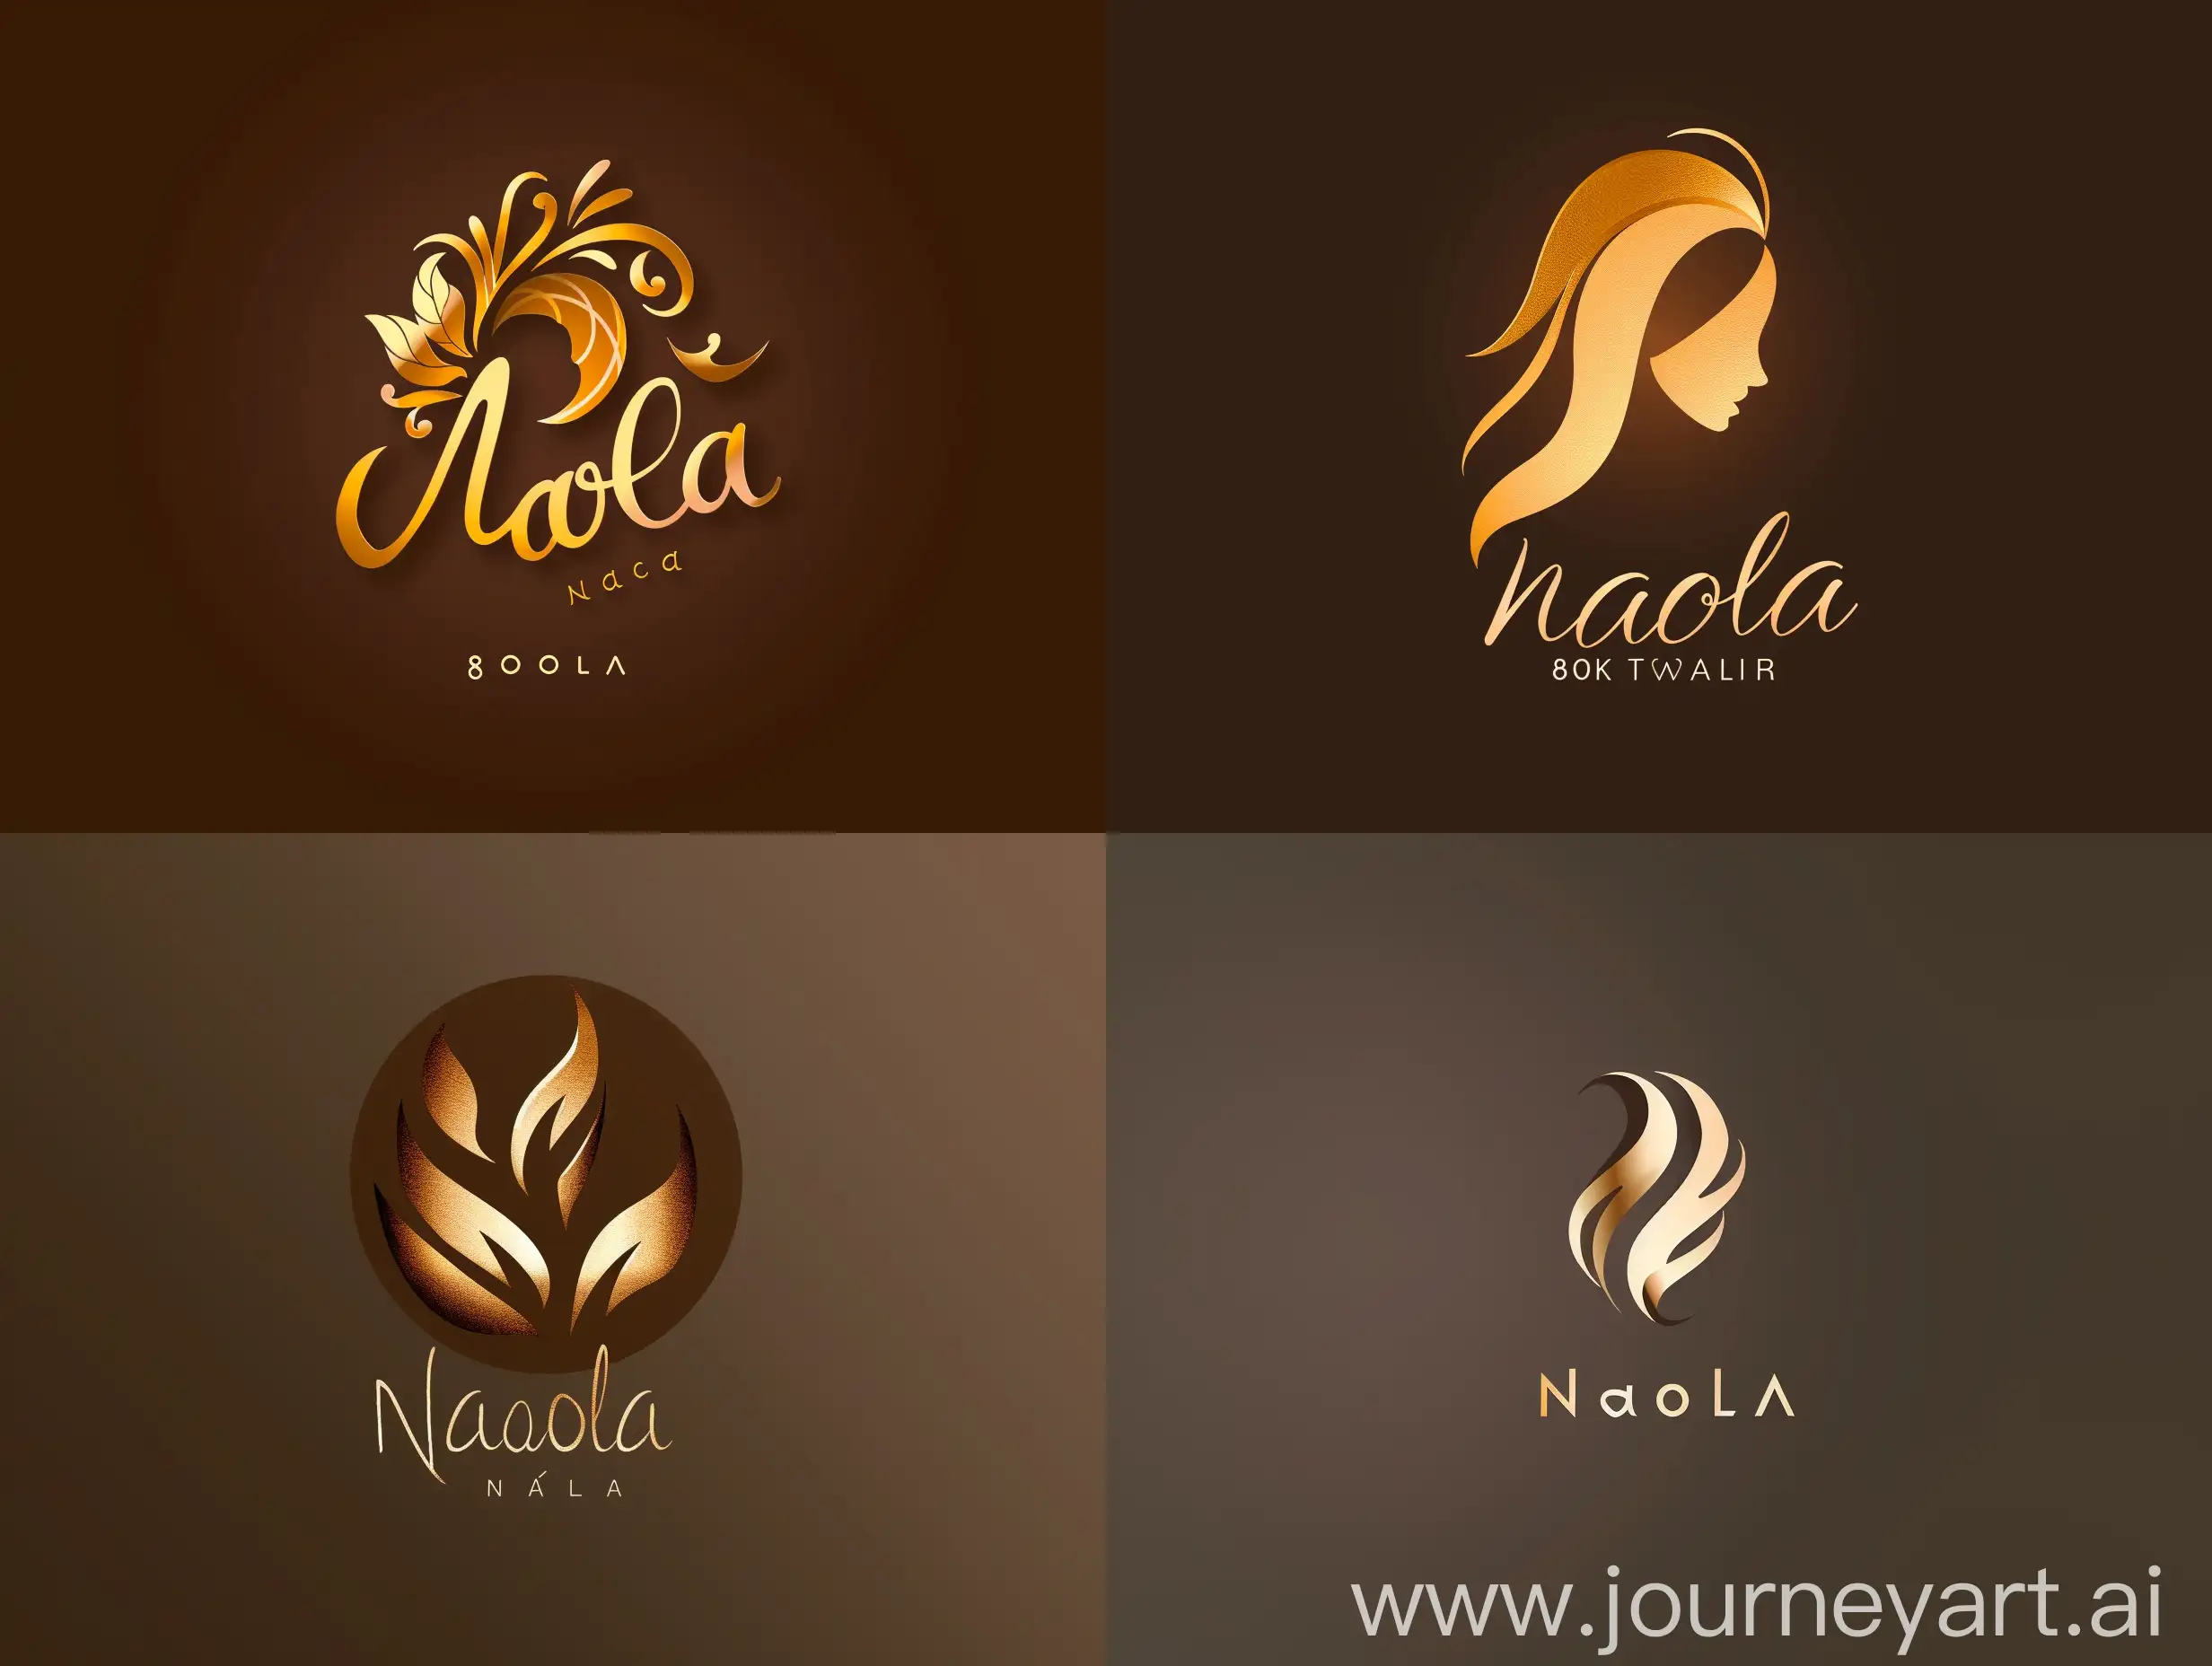 Naola-Leather-Goods-Workshop-Logo-with-Rich-Gold-and-Refreshing-Skin-Tones